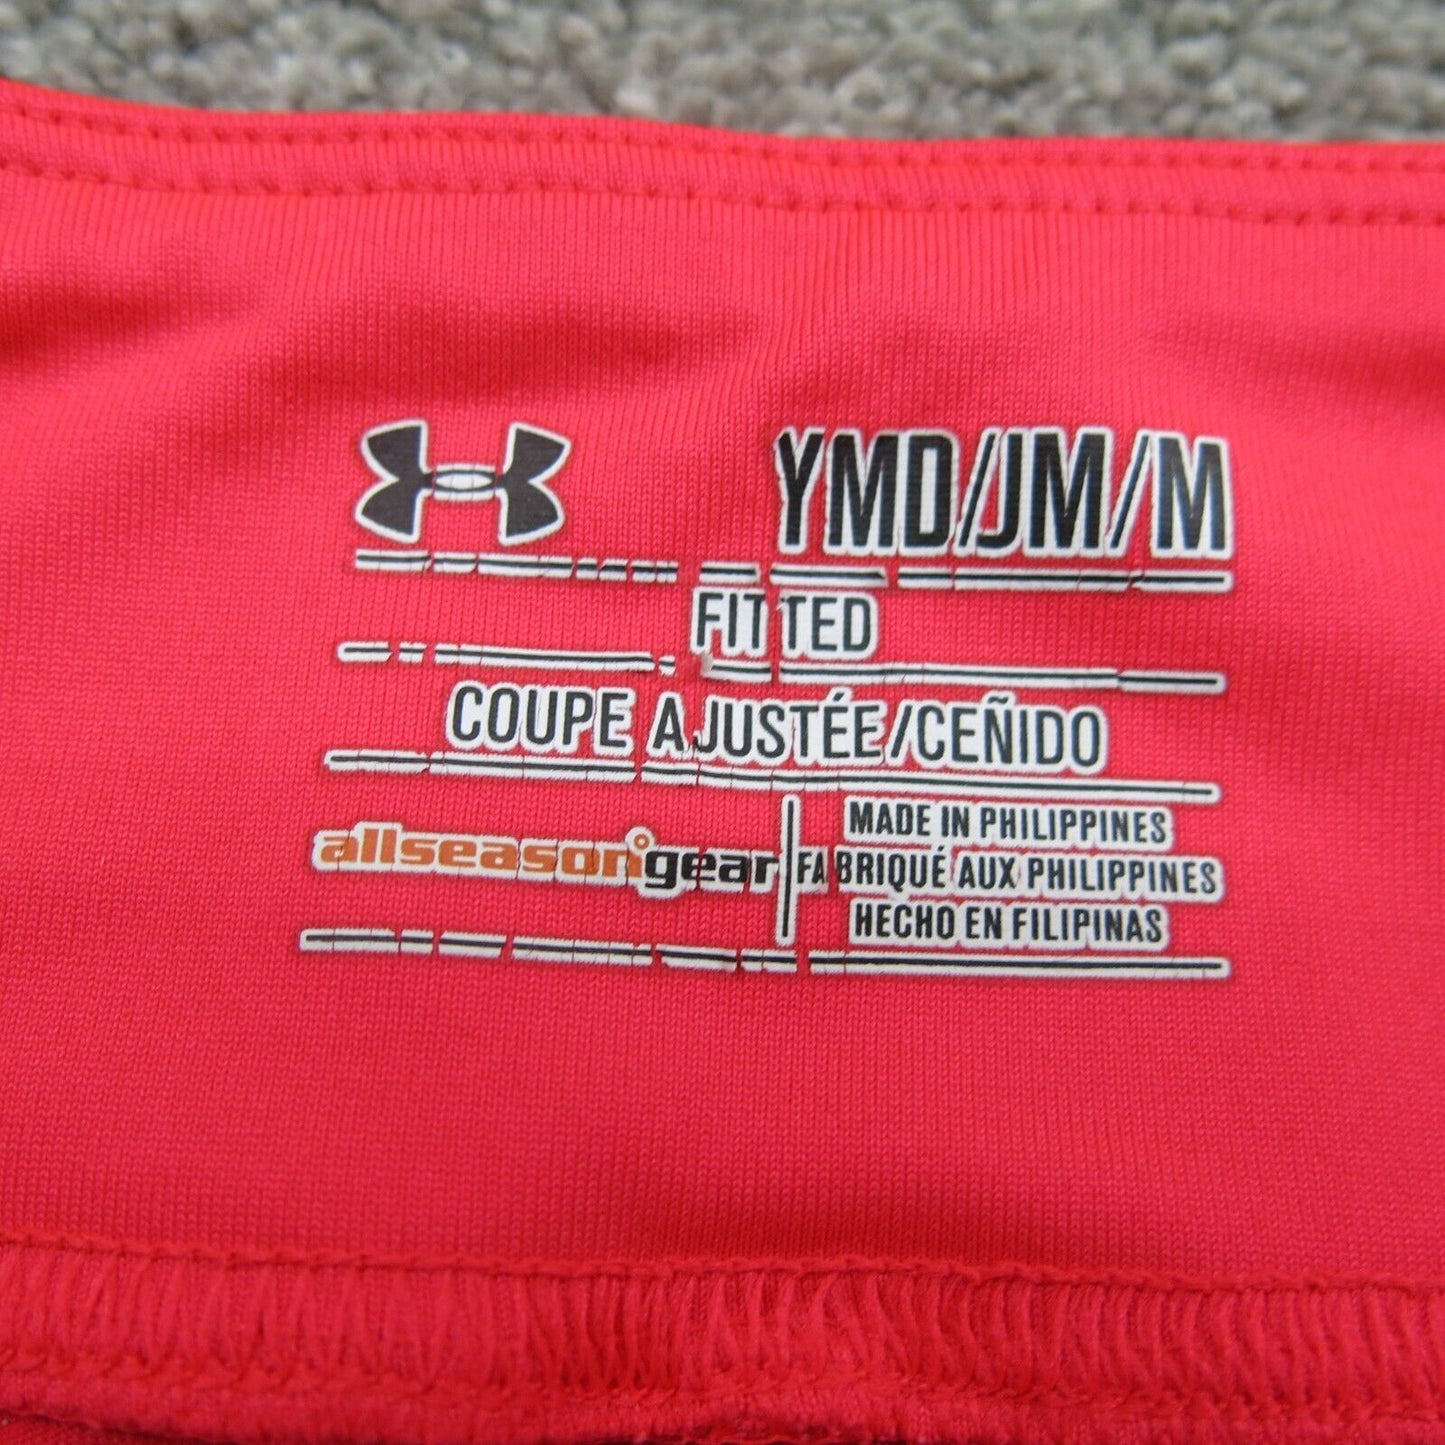 Under Armour Shorts Youth Size Medium Pink Solid Allseasongear Athletic Fitted